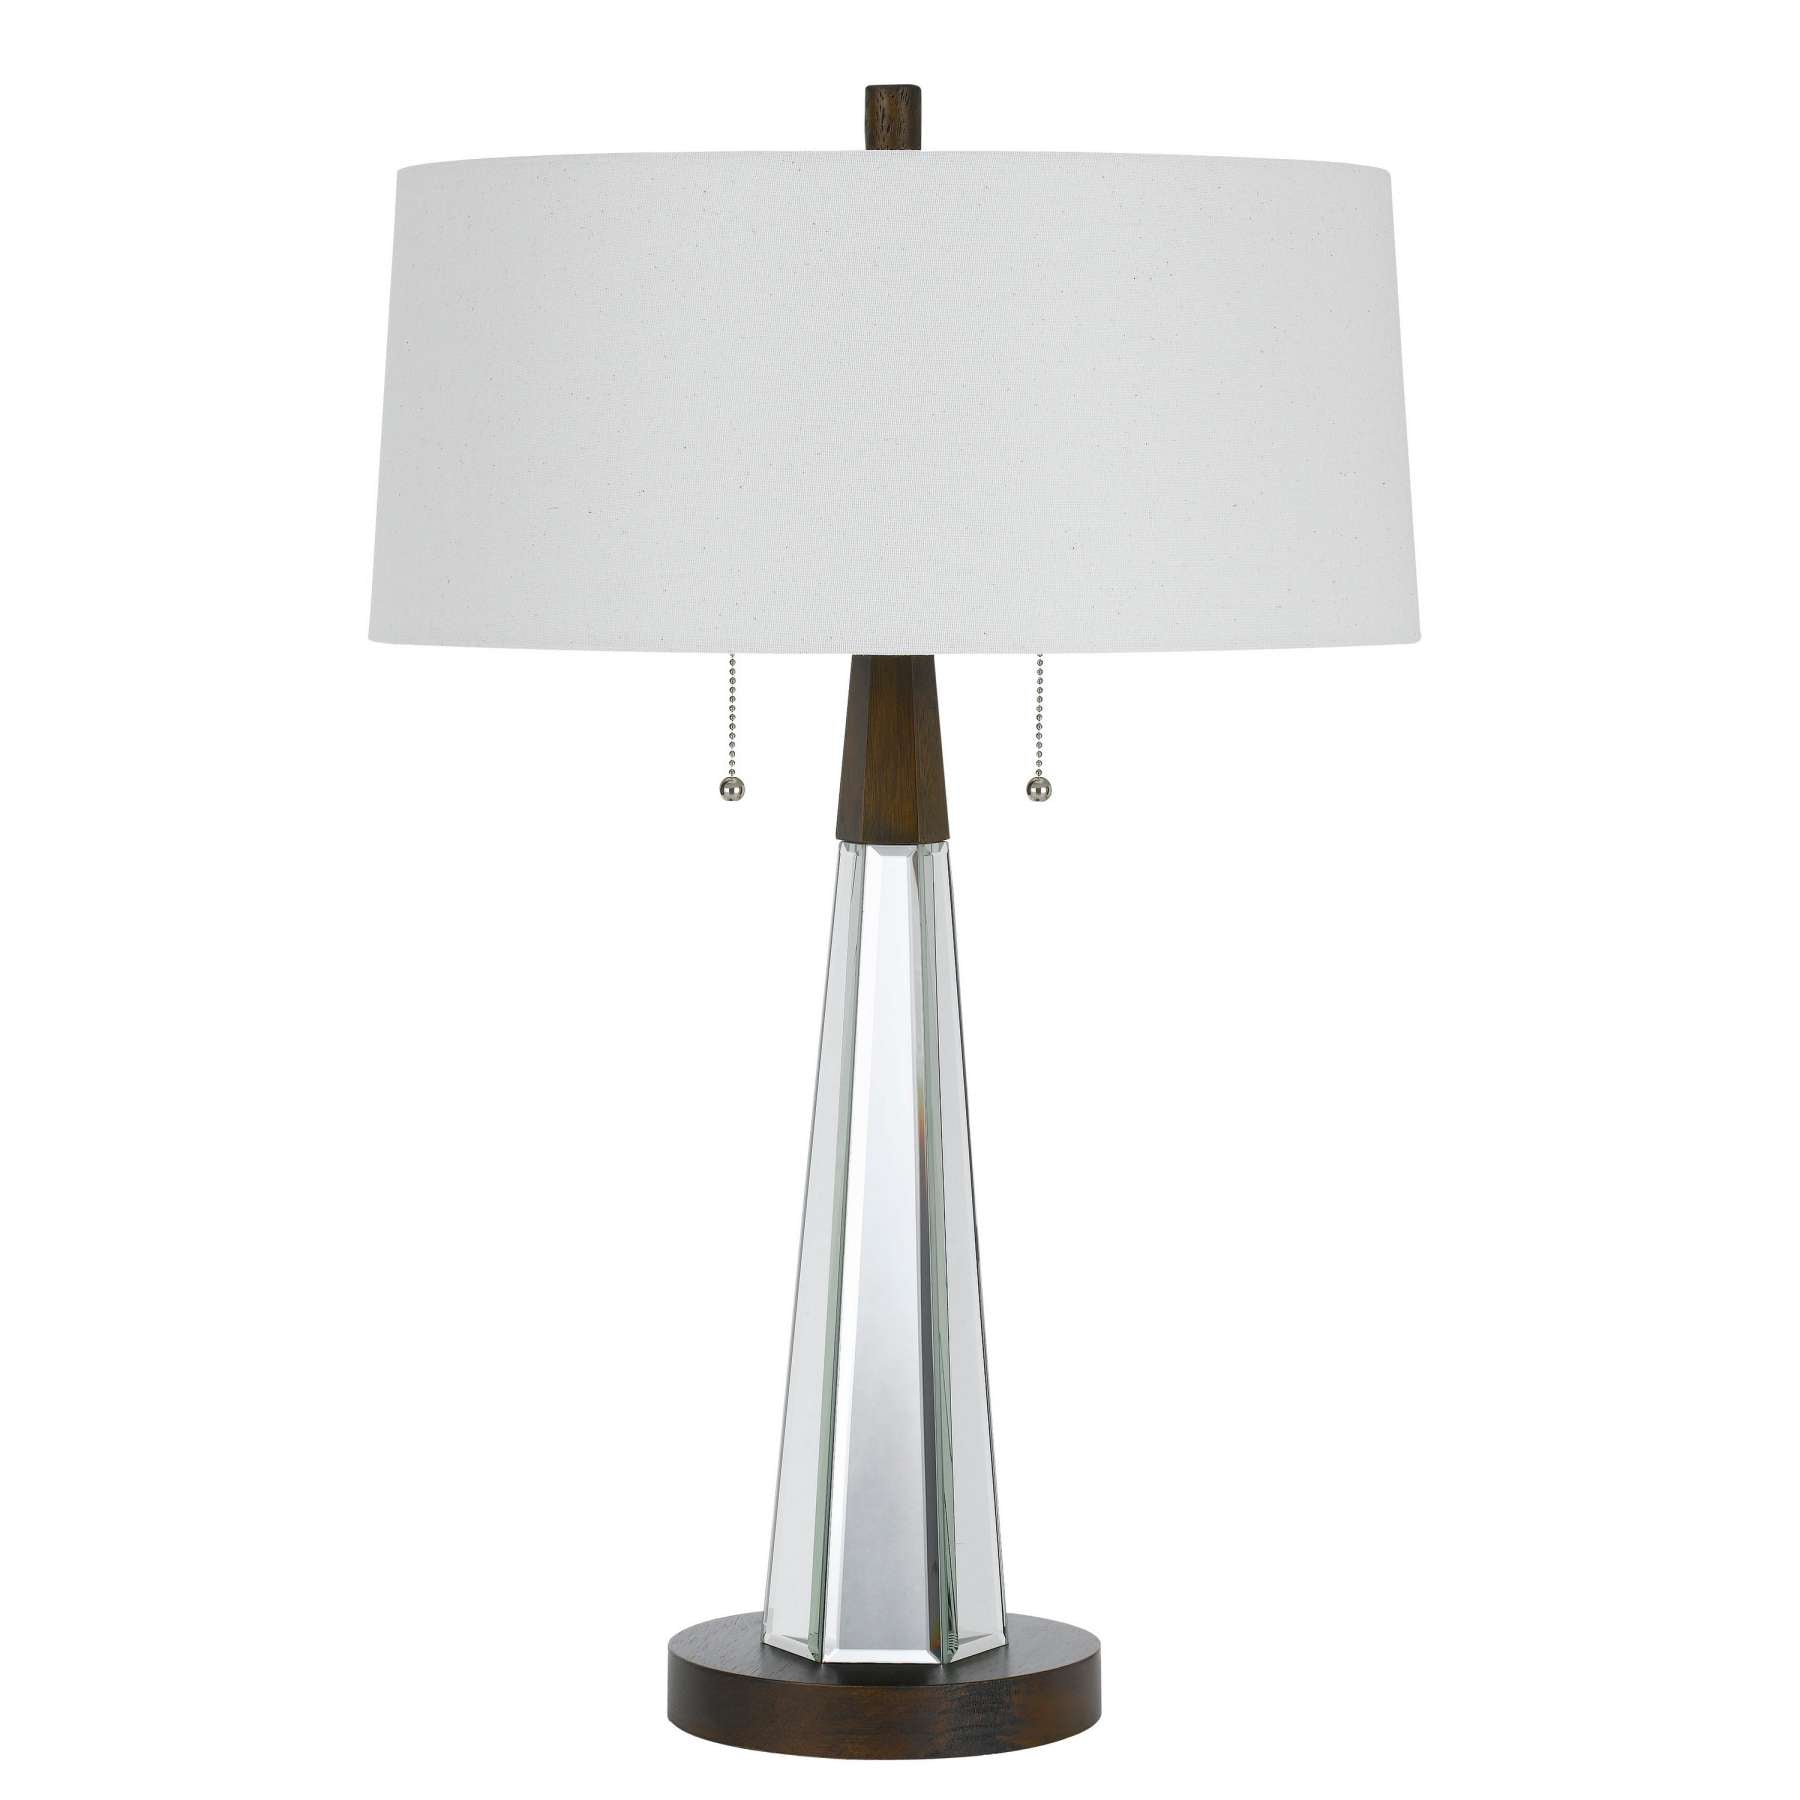 Fabric Shade Table Lamp With Faceted Mirror And Wooden Base, White By Benzara